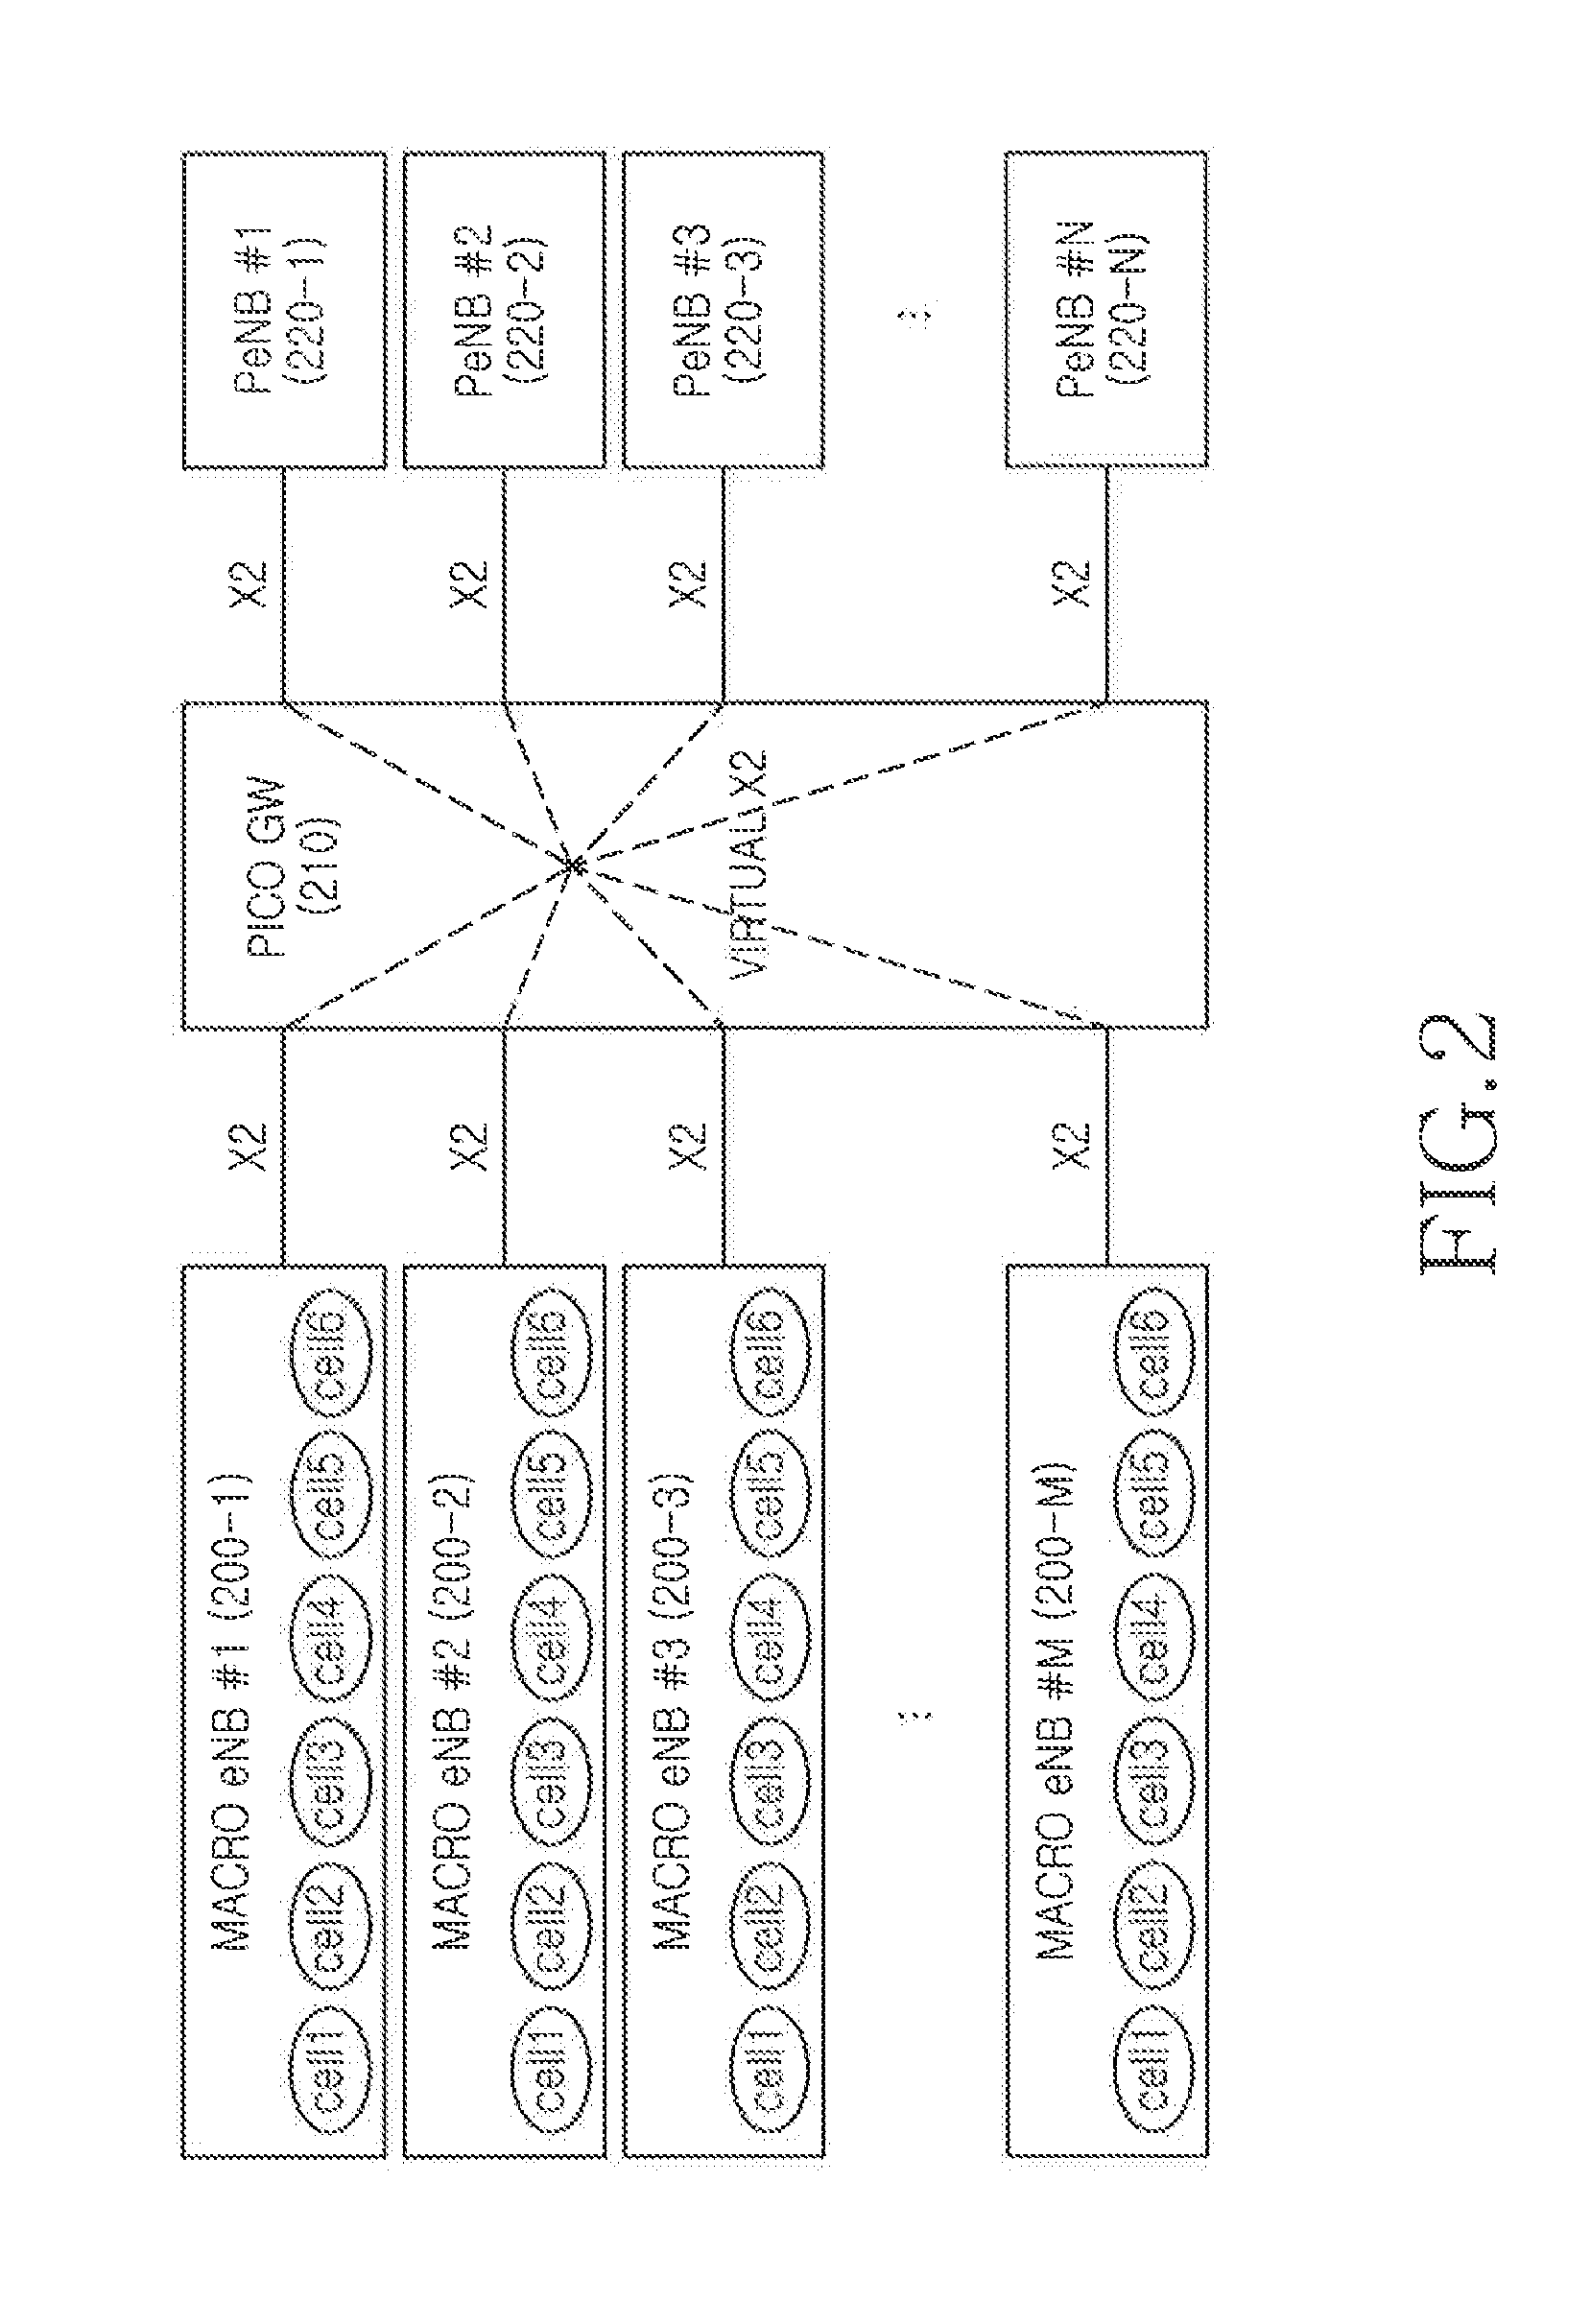 Interworking method and device between base stations using gateway in wireless communication system of hierarchical cell structure